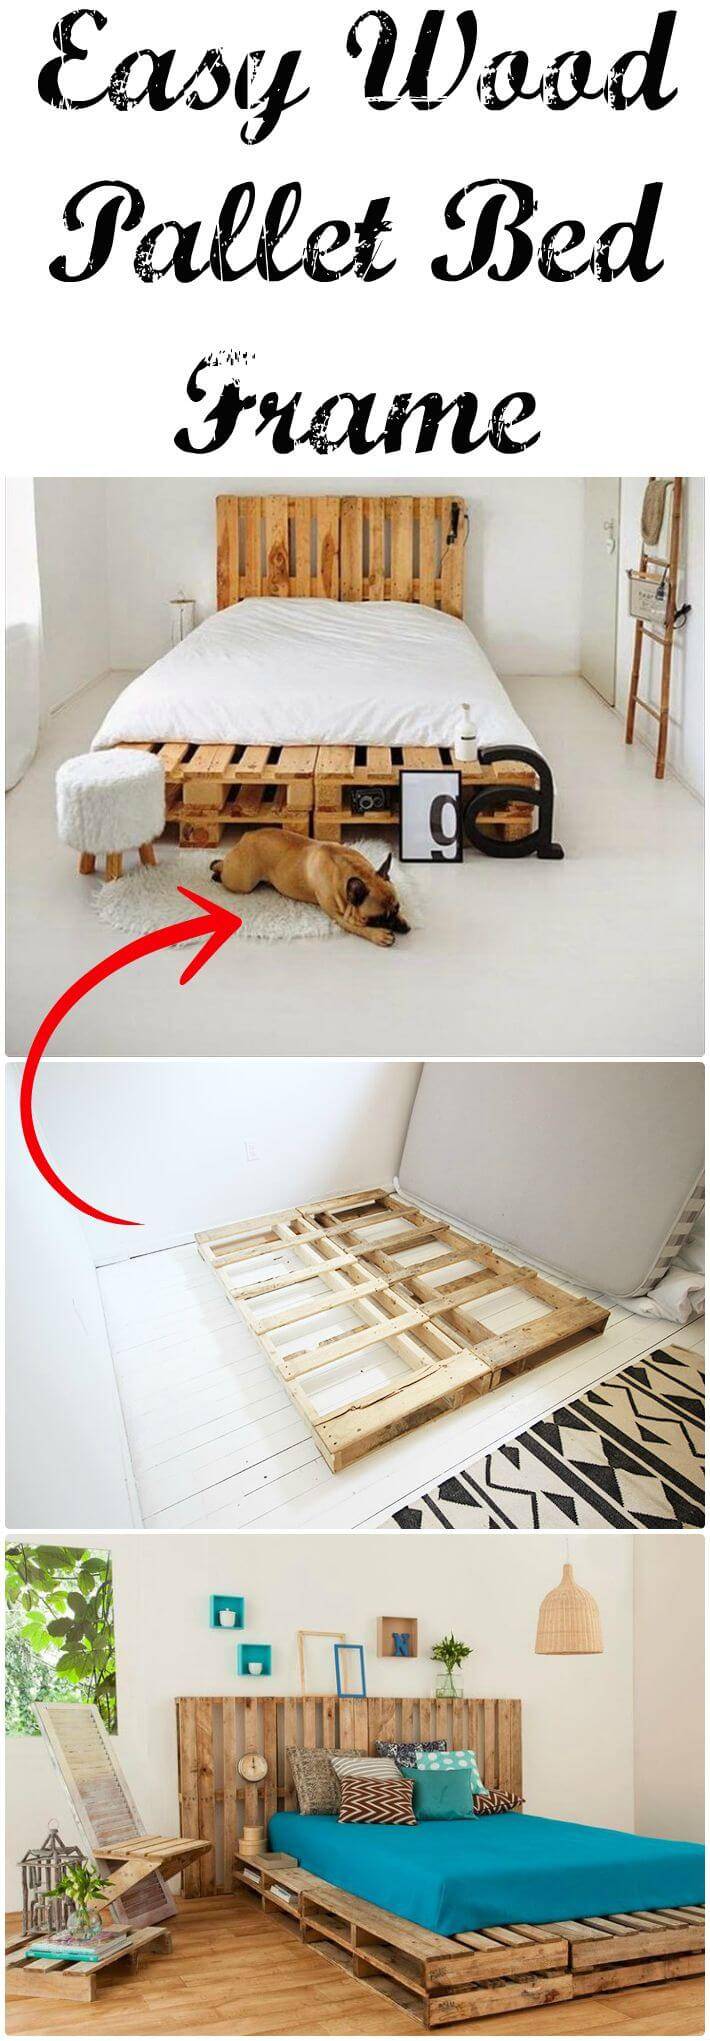 11 Diy Pallet Bed Frame Ideas With Step By Plans Crafts